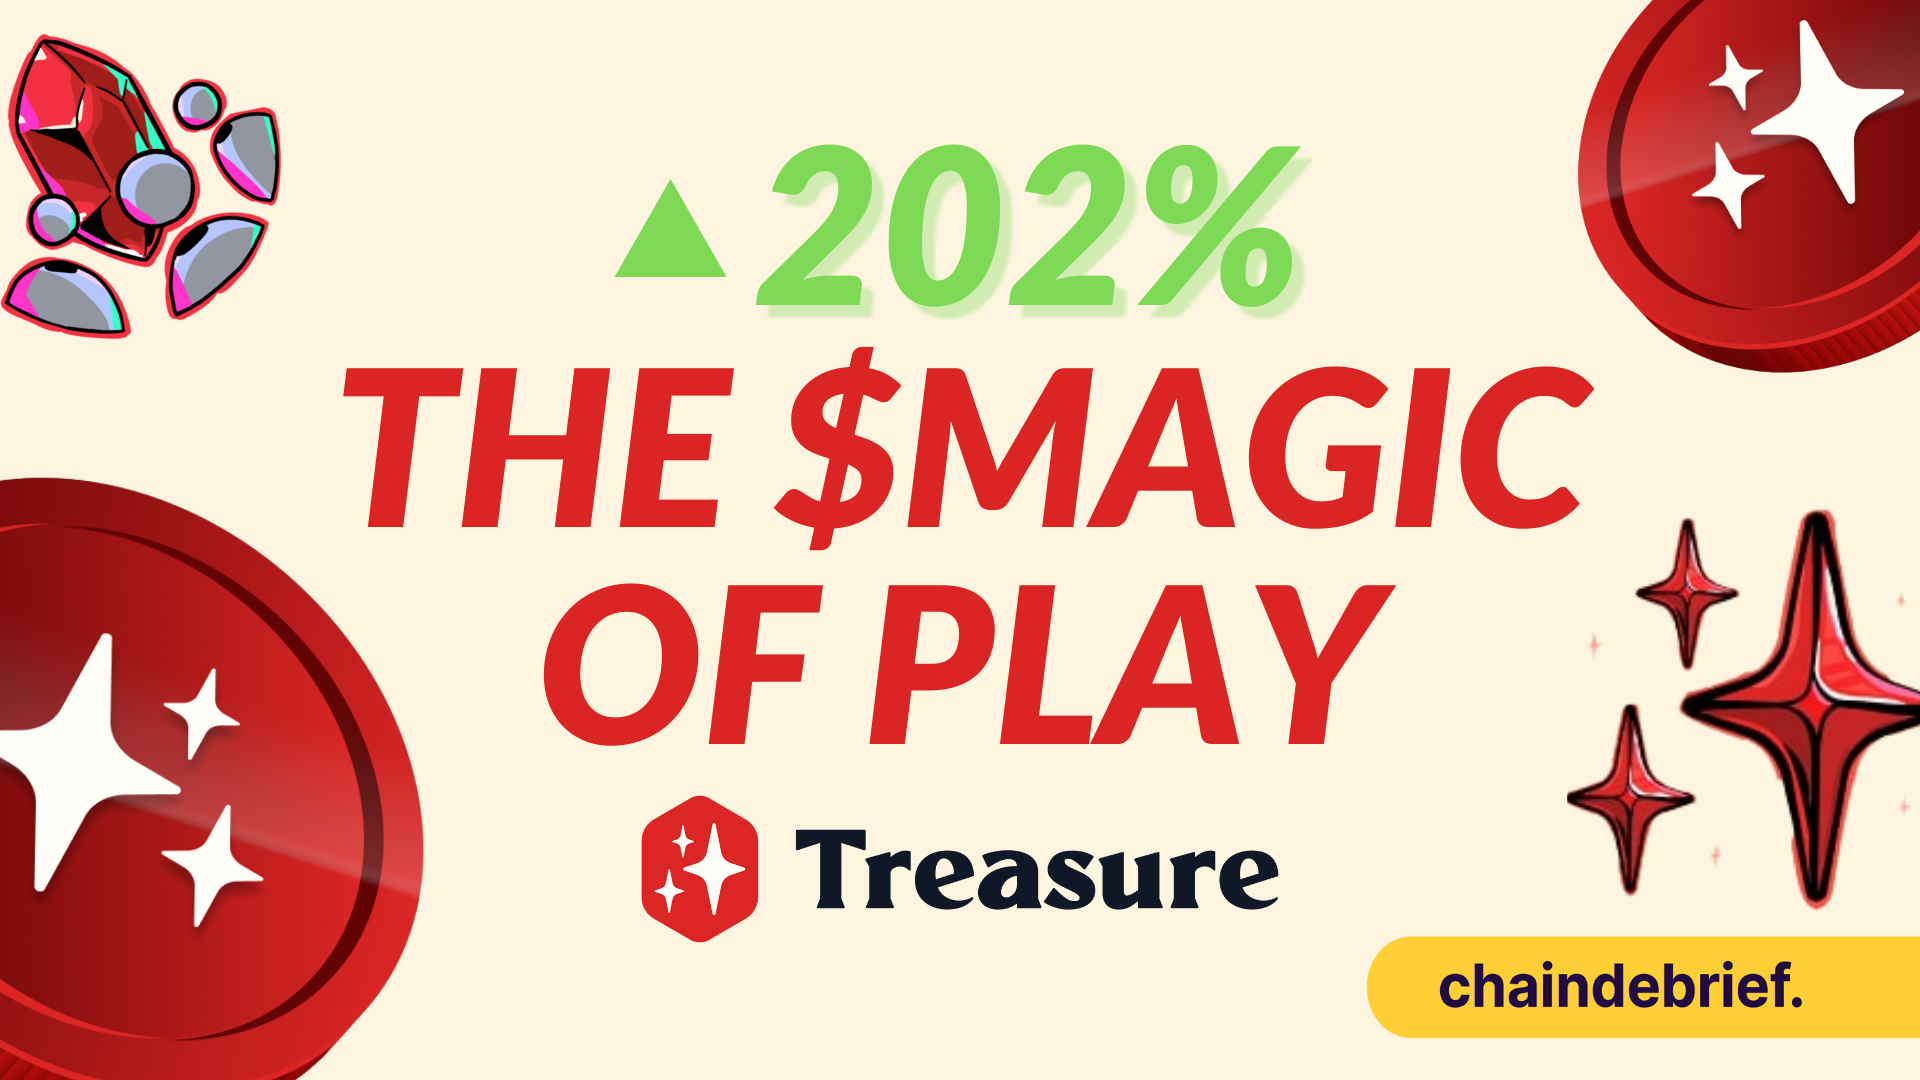 $MAGIC Is Up 202%, Here’s Why Treasure Will Redefine Web3 Gaming